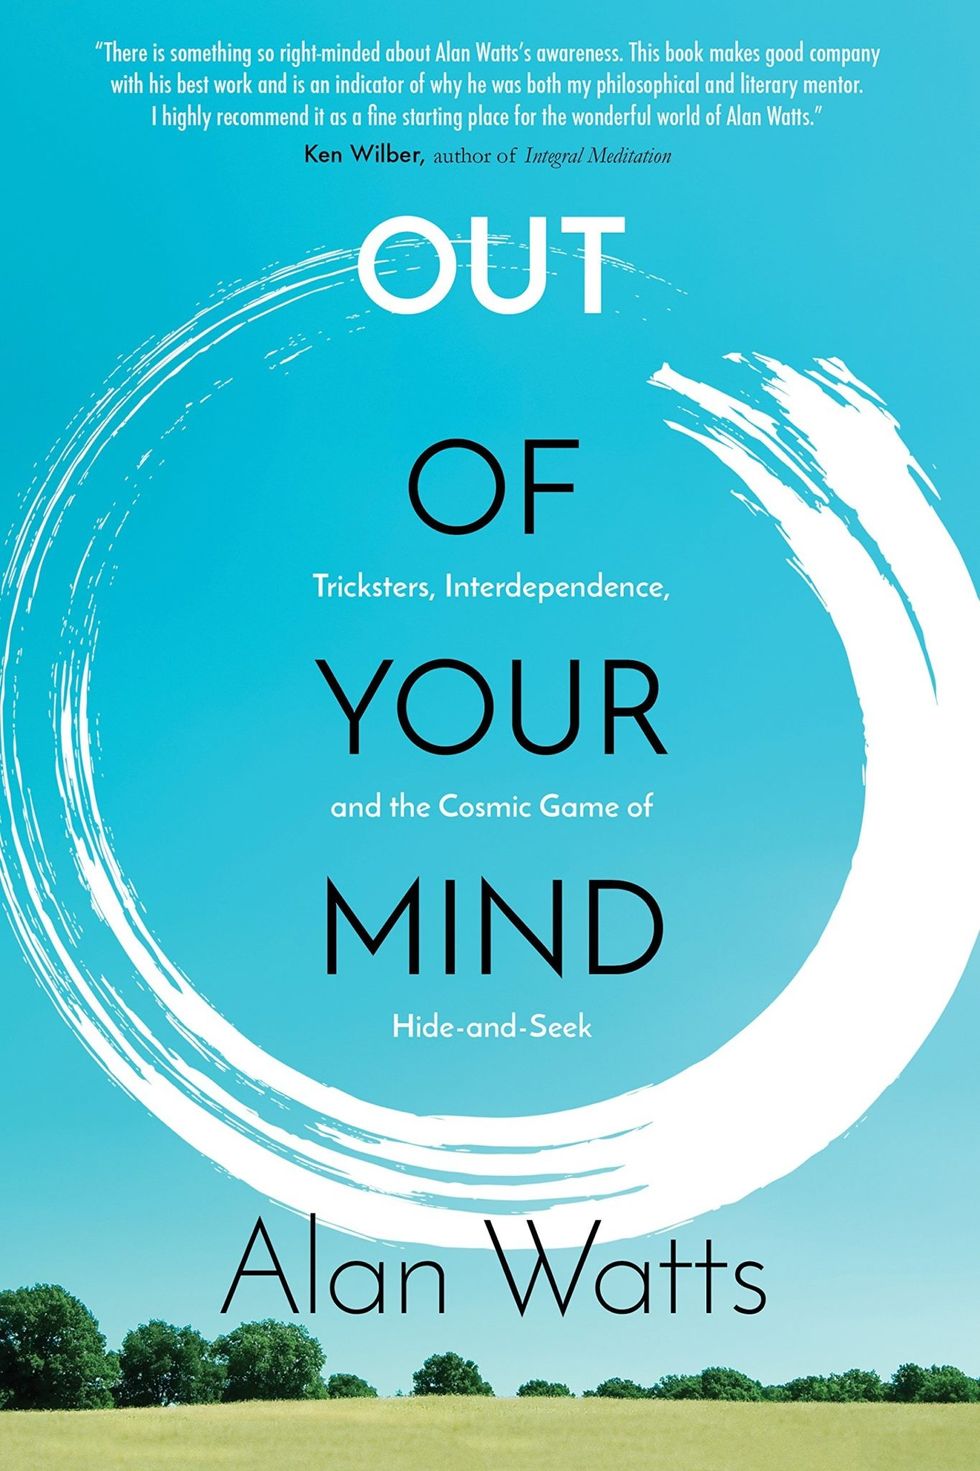 out-of-your-mind-meditation-book-alan-watts